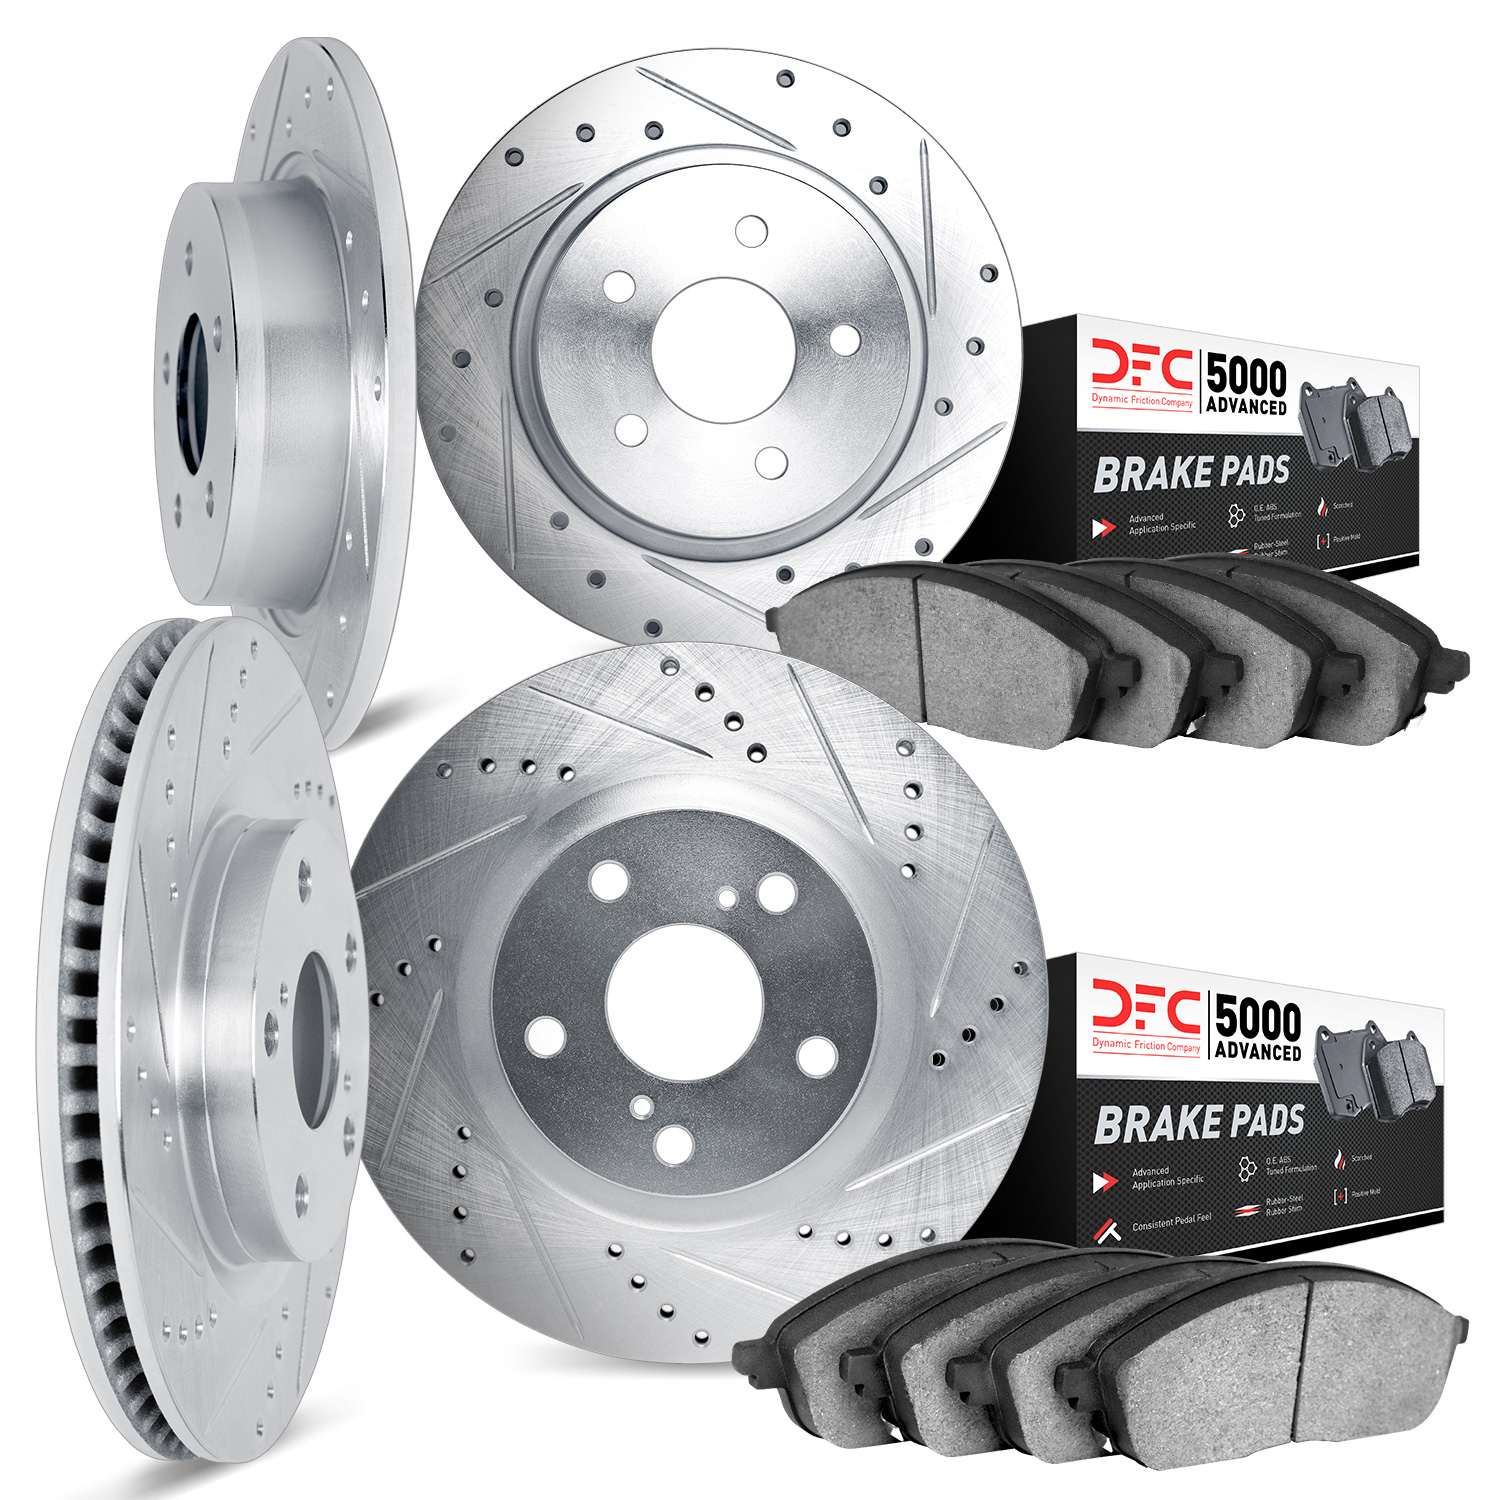 7504-54299 Drilled/Slotted Brake Rotors w/5000 Advanced Brake Pads Kit [Silver], 1999-2003 Ford/Lincoln/Mercury/Mazda, Position: